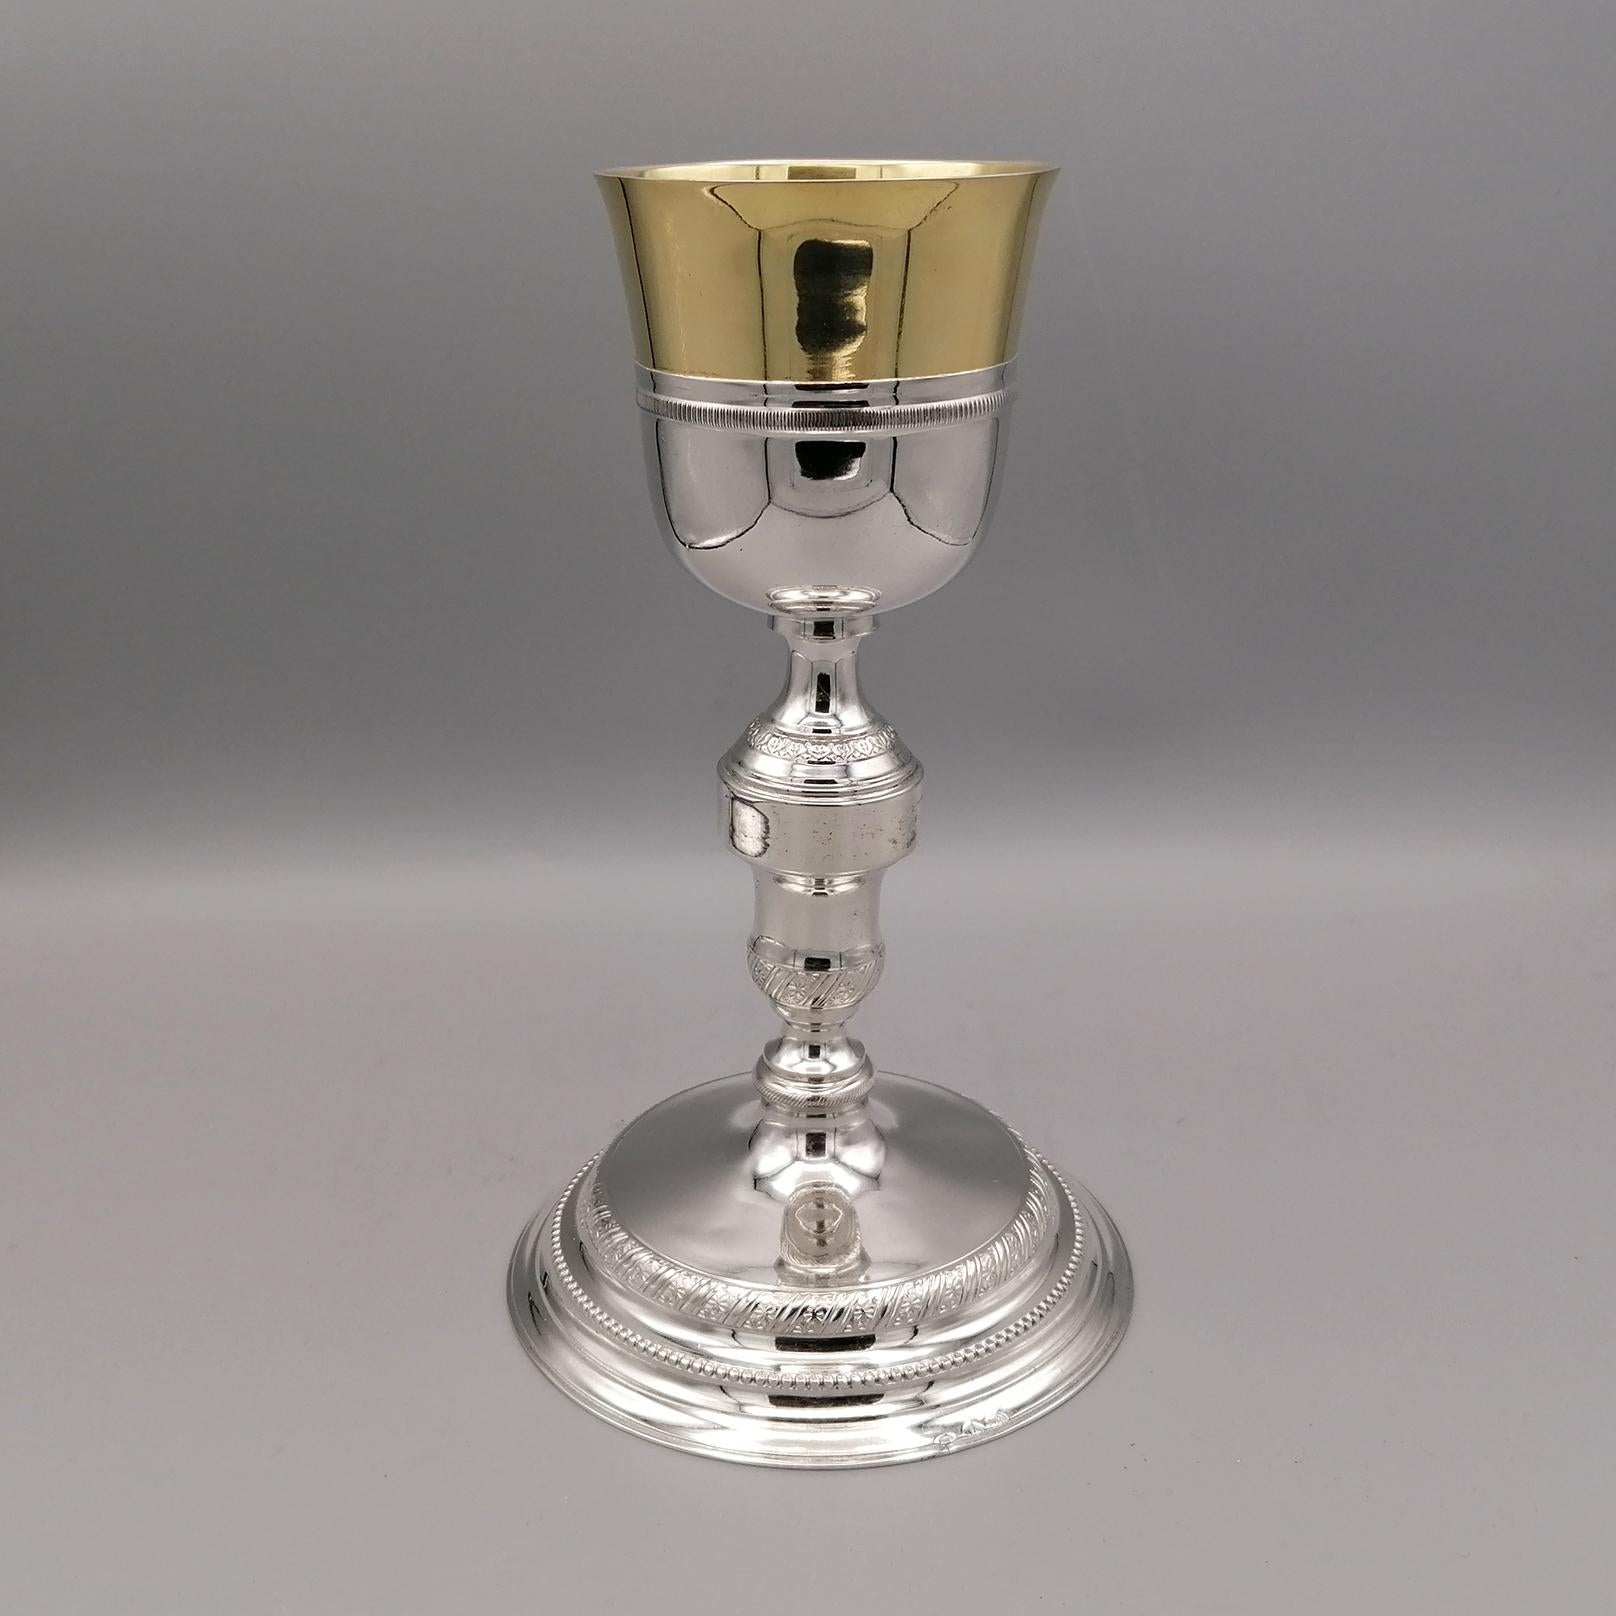 XIX ° Century Italian silver Liturgical Chatolic Chalice.
The Chalice, smooth and very balanced in its shapes, is in Empire style and is characterized by the classic palmette design on the stem that identifies its style.
Made in Italy in Turin, the